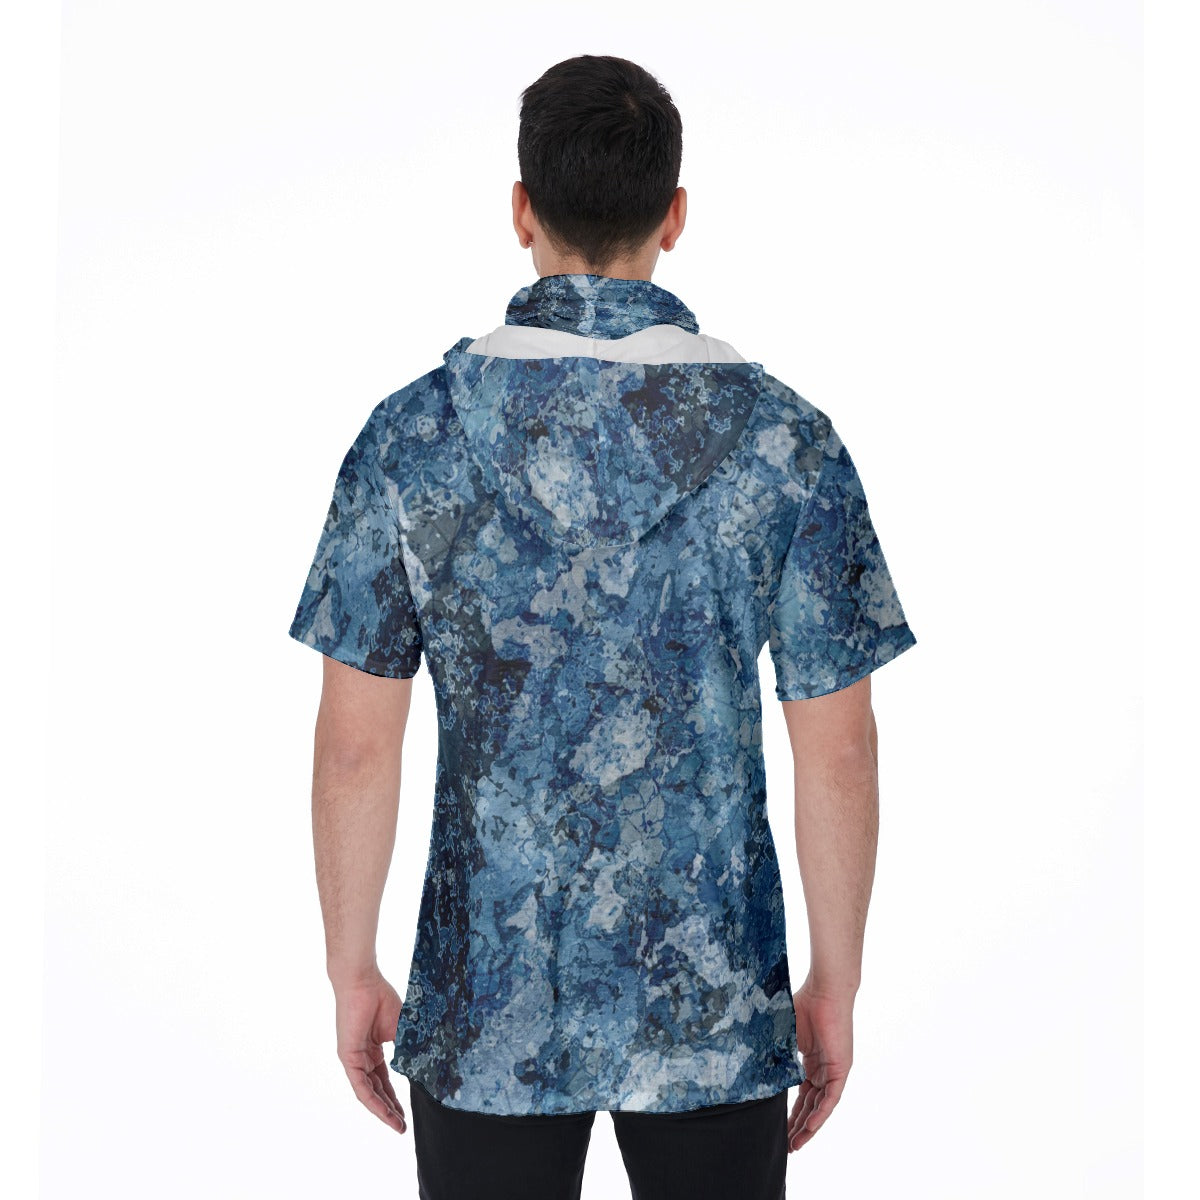 Men's Hooded T's with Built-in Mask -  The Mix Bluewater